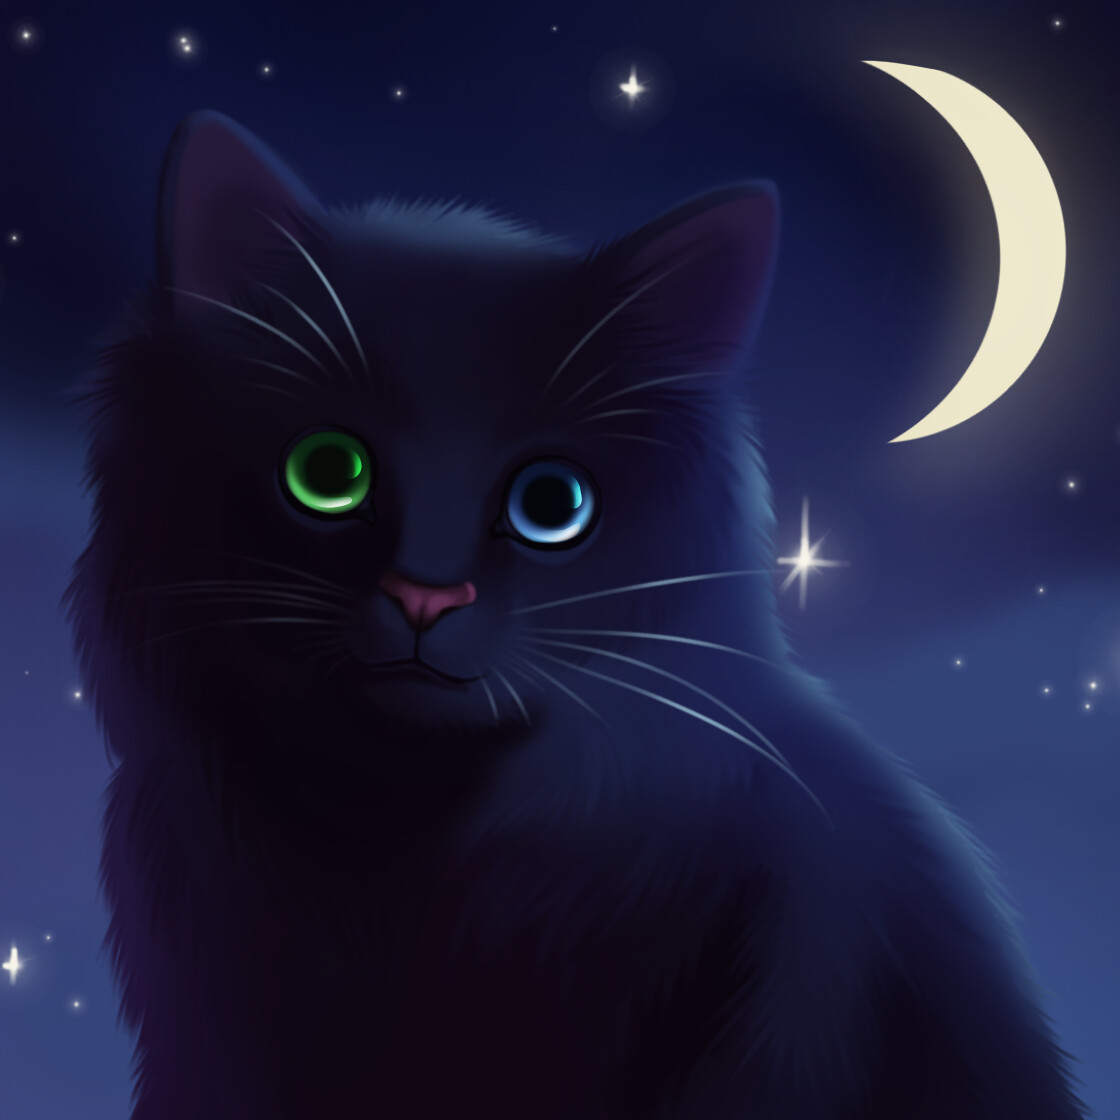 Glawdys Hodiesne  Commission  Cat avatar